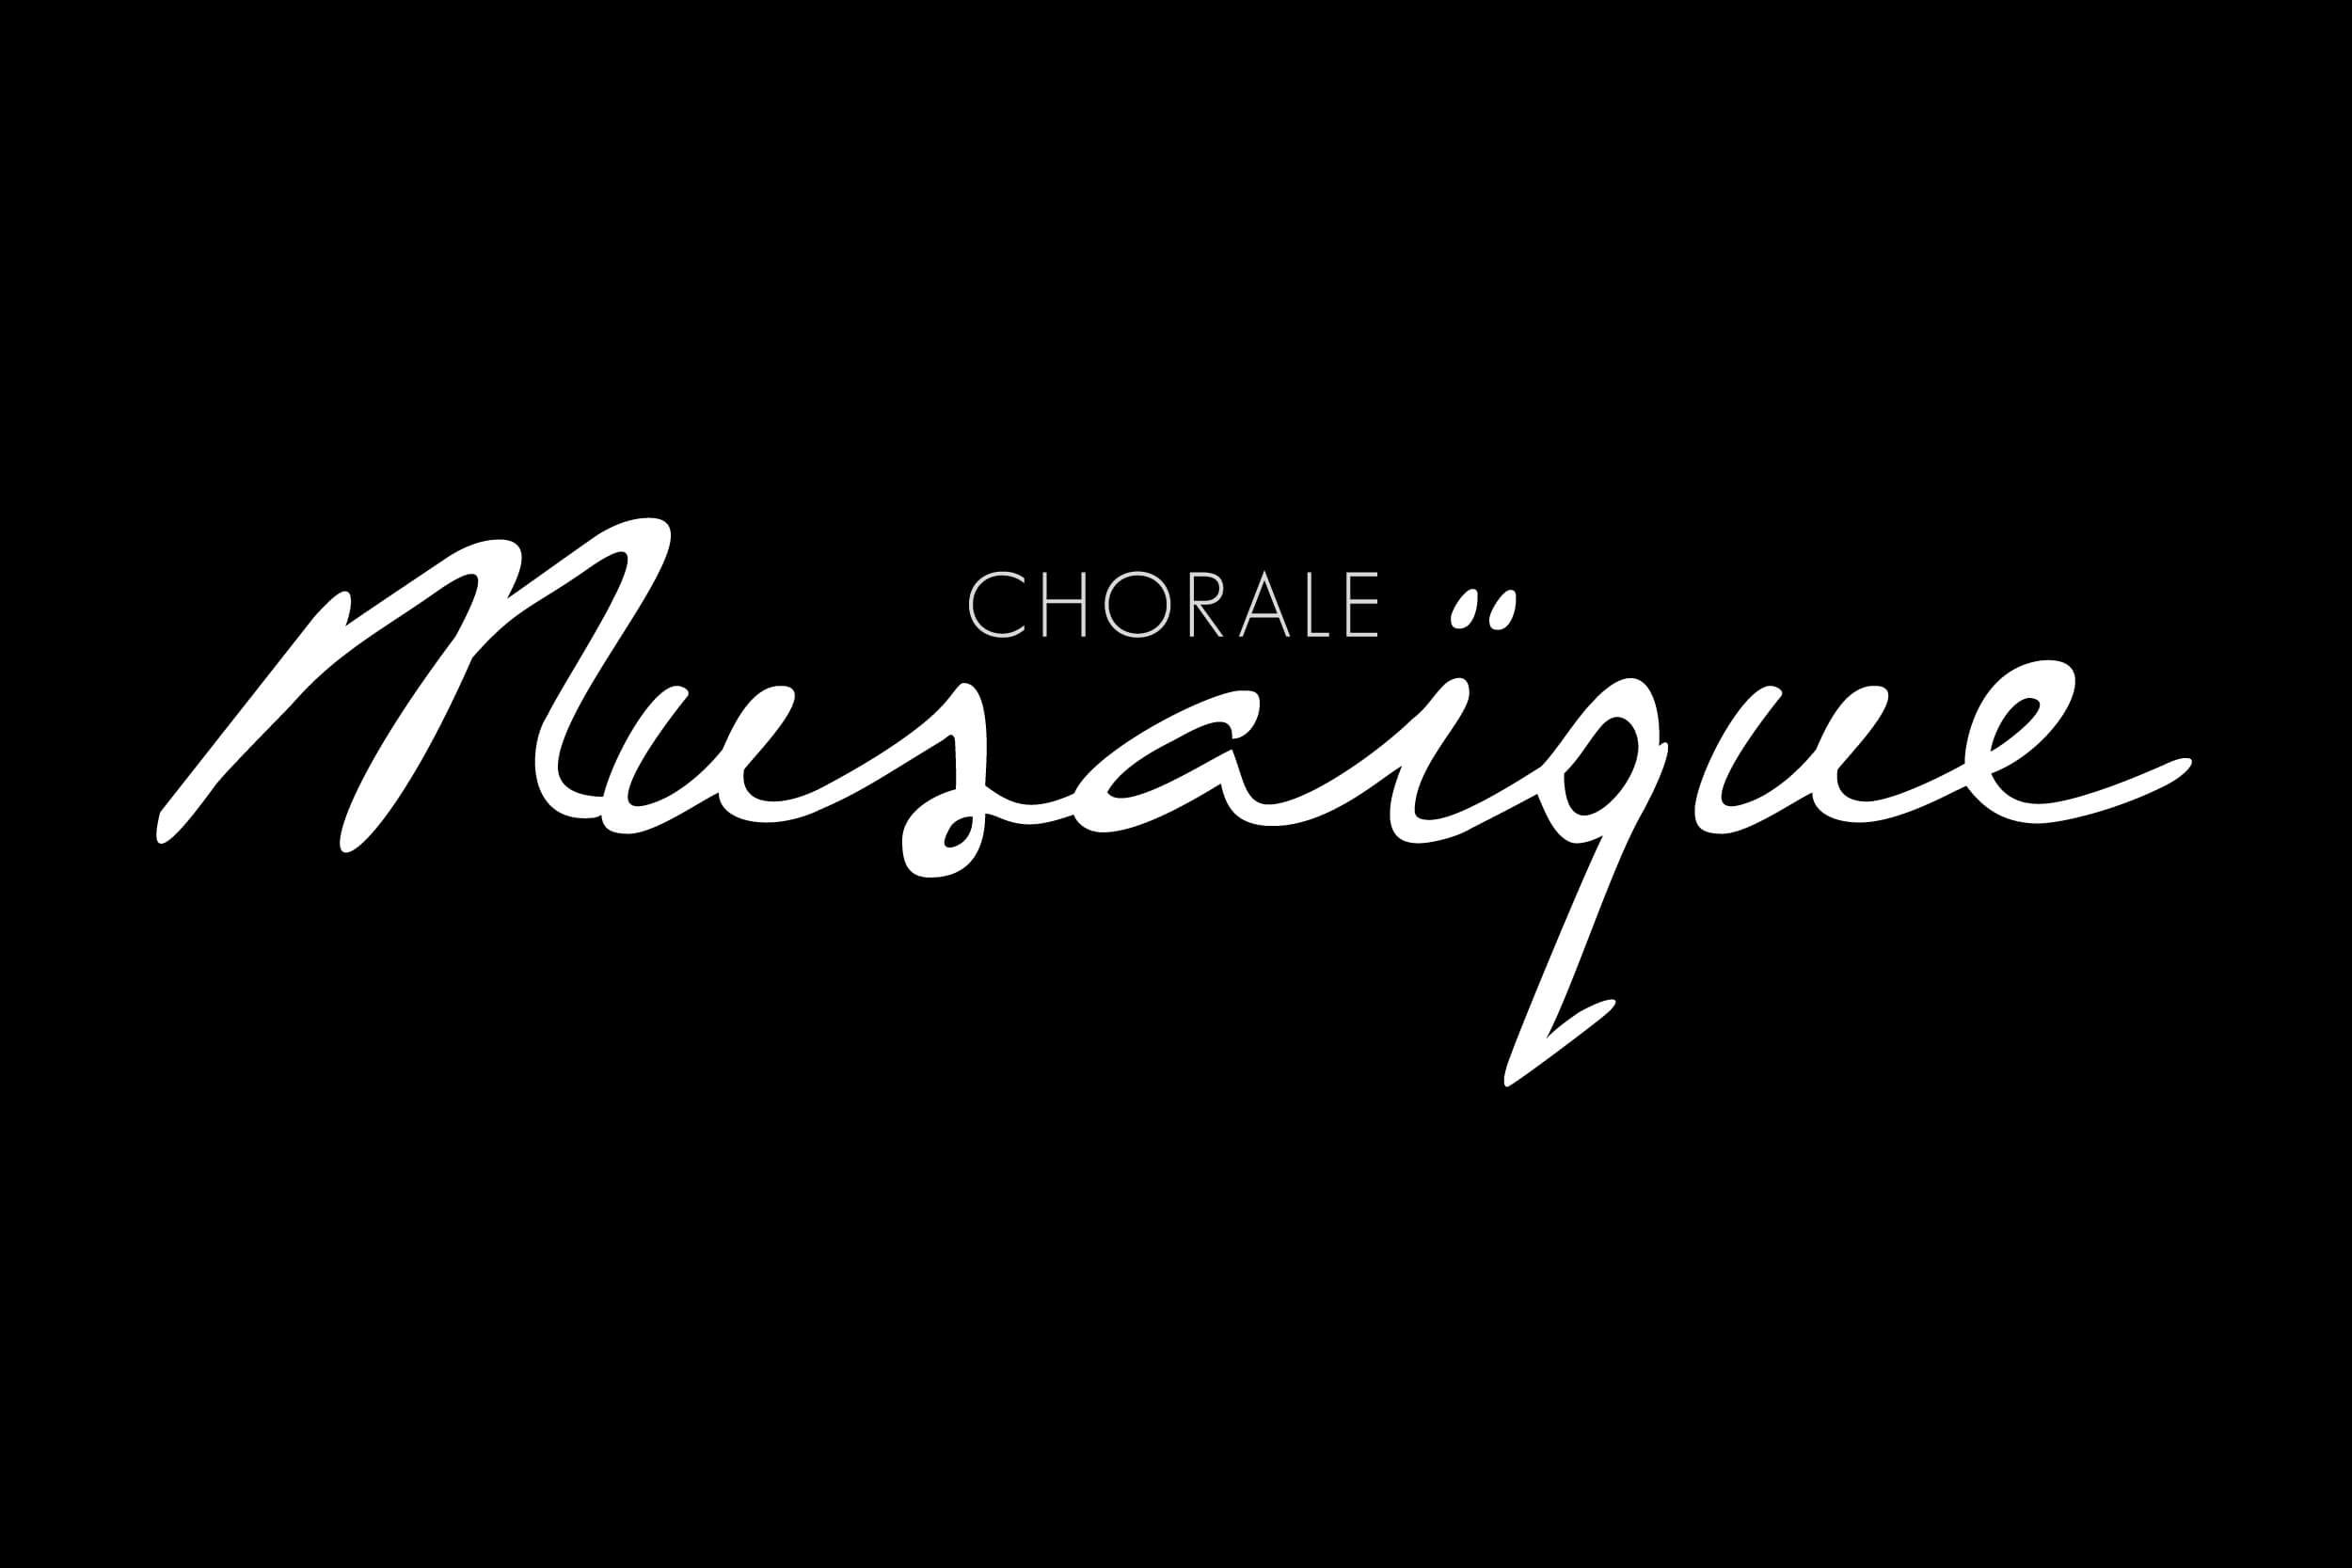 See Chorale Musaïque's full brand identity  ›